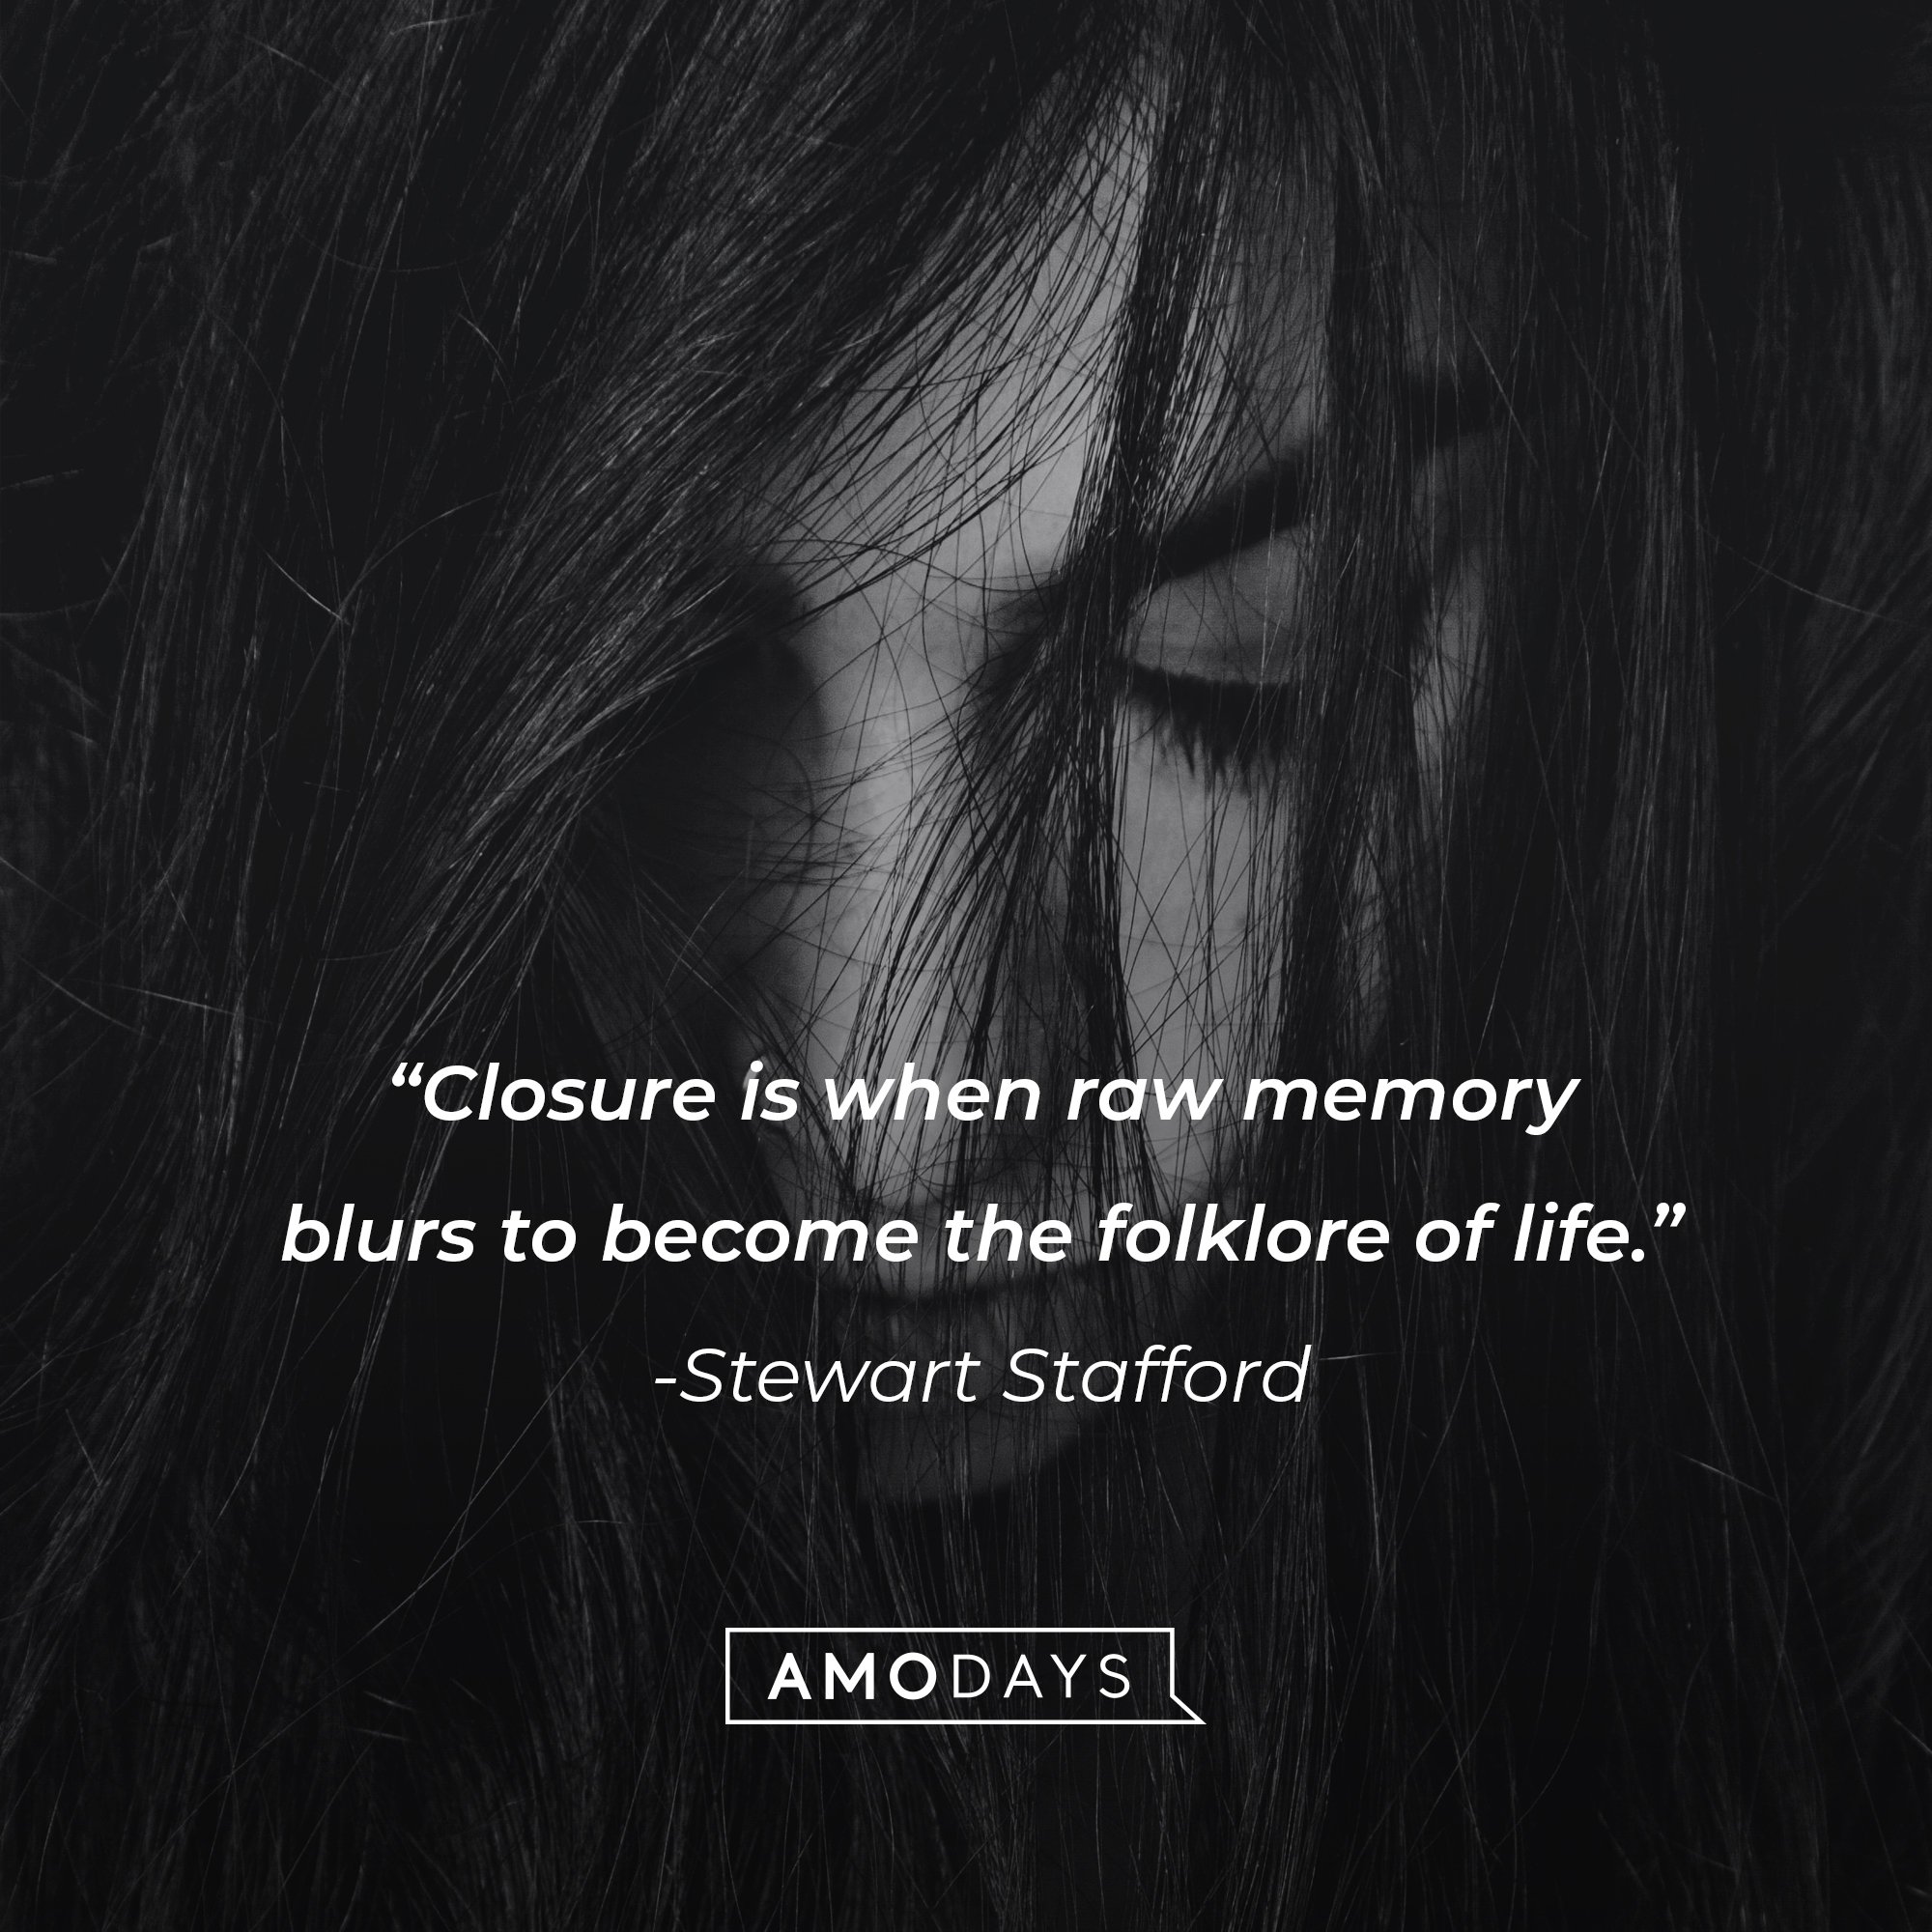 Steward Stafford's quote: "Closure is when raw memory blurs to become the folklore of life." | Image: AmoDays